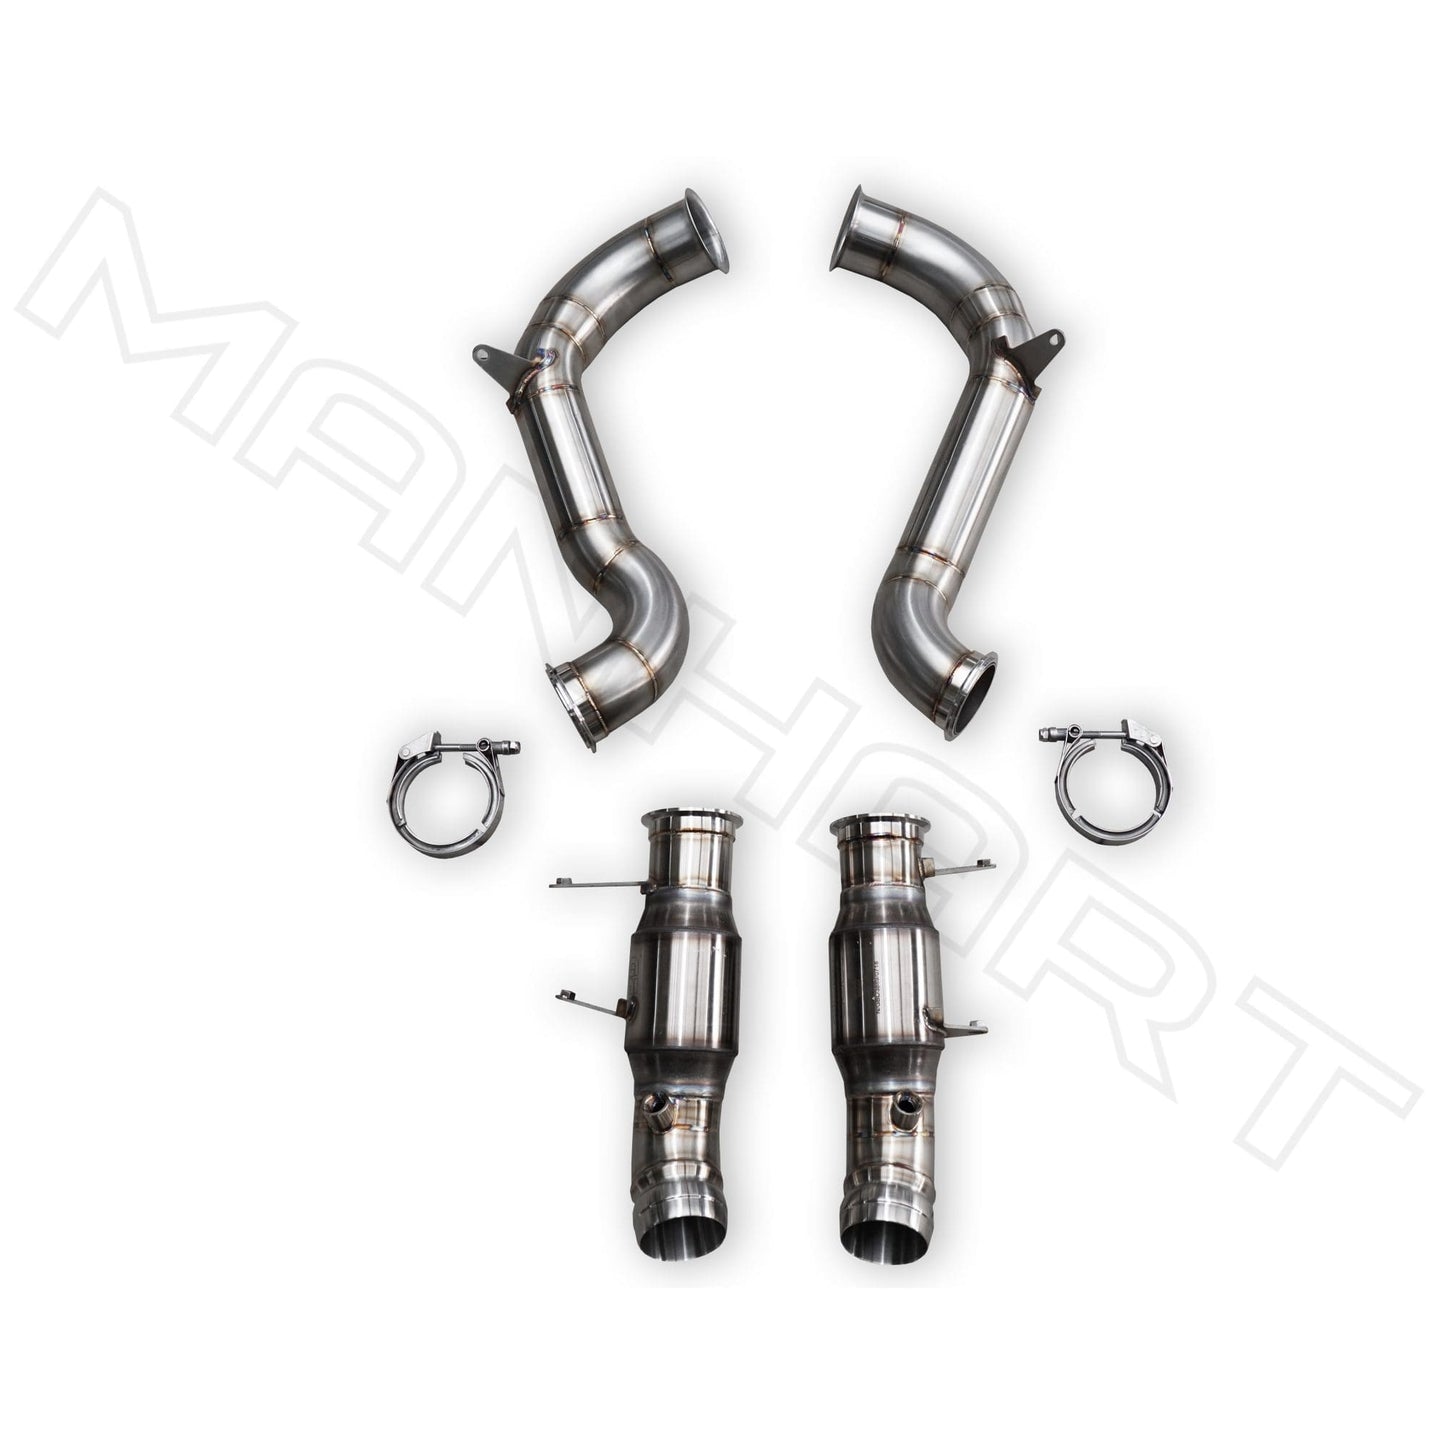 MANHART MH5GLC633100 DOWNPIPES RACE FOR MERCEDES-BENZ GLC 63 S AMG